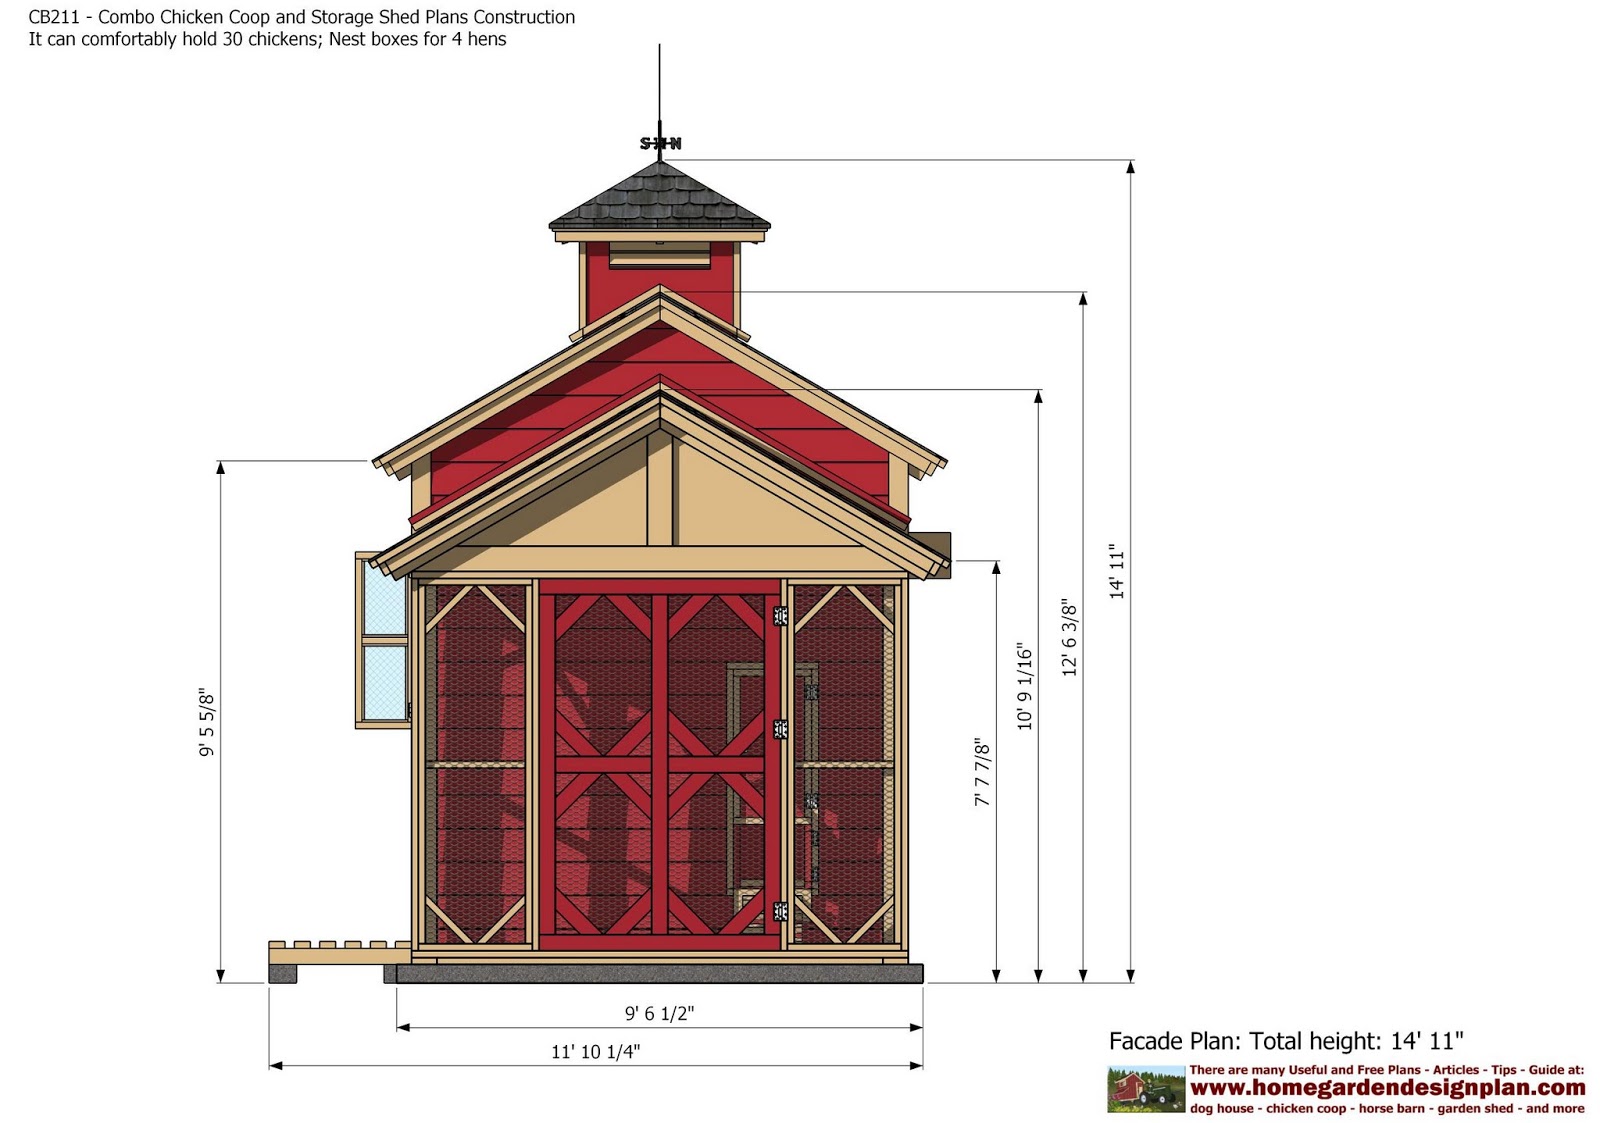  Combo Chicken Coop Garden Shed Plans Chicken Coop Plans Storage Shed